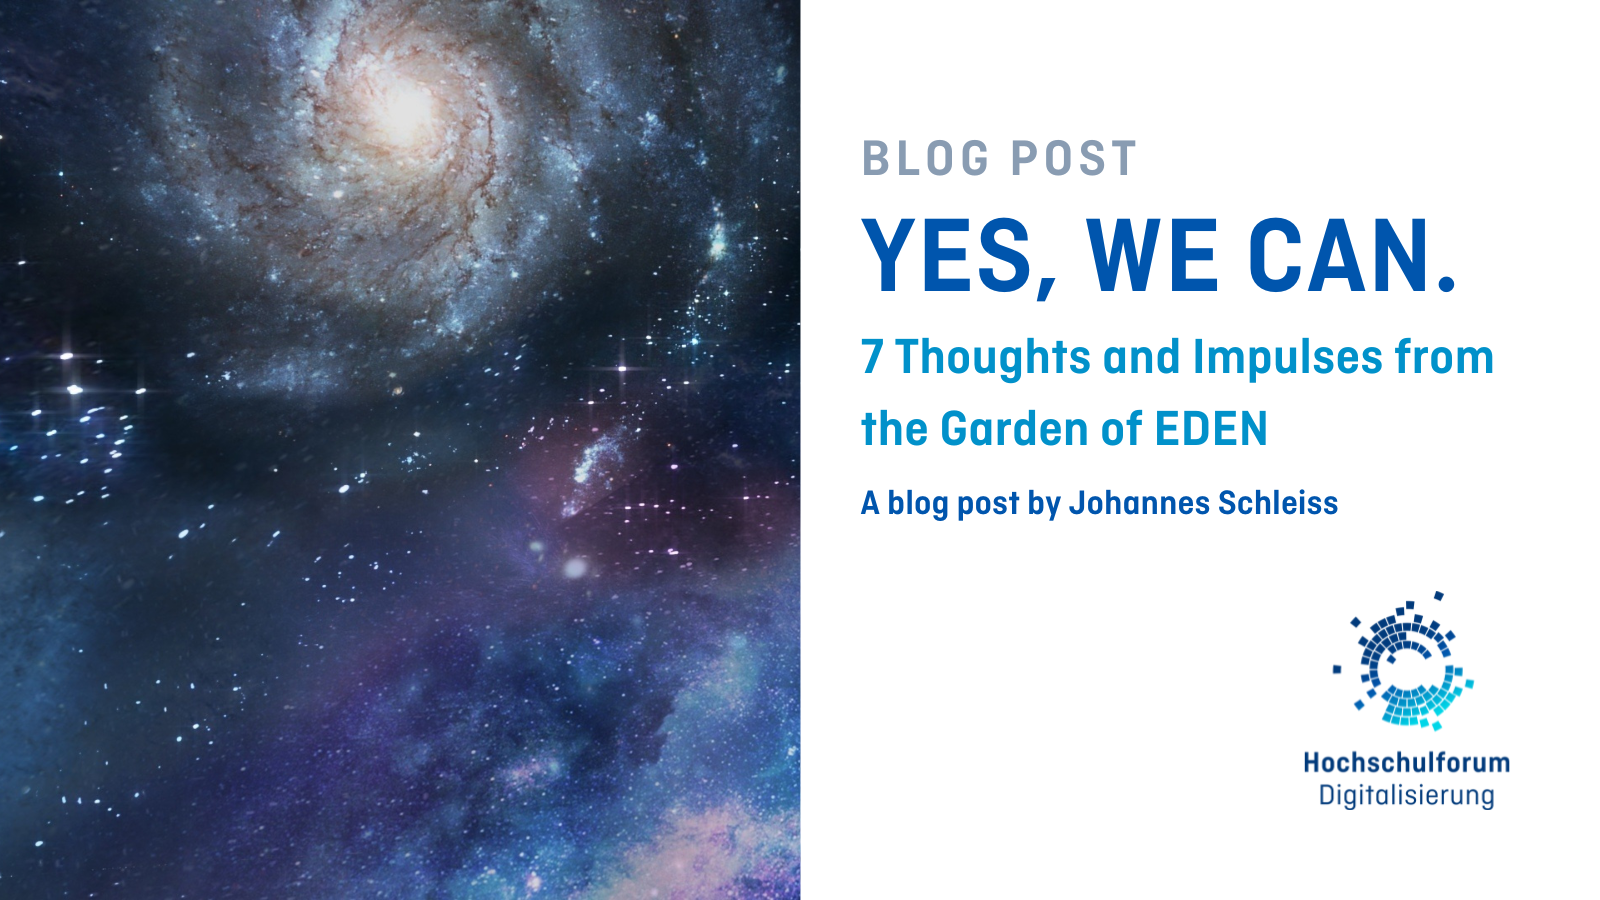 Cover of the blog post: "YES, WE CAN. - 7 thoughts and impulses from the garden of EDEN". Subtitle: "A blog post by Johannes Schleiss". Photo on the left shows a galaxy in space. Logo on the bottom right: Hochschulforum Digitalisierung.